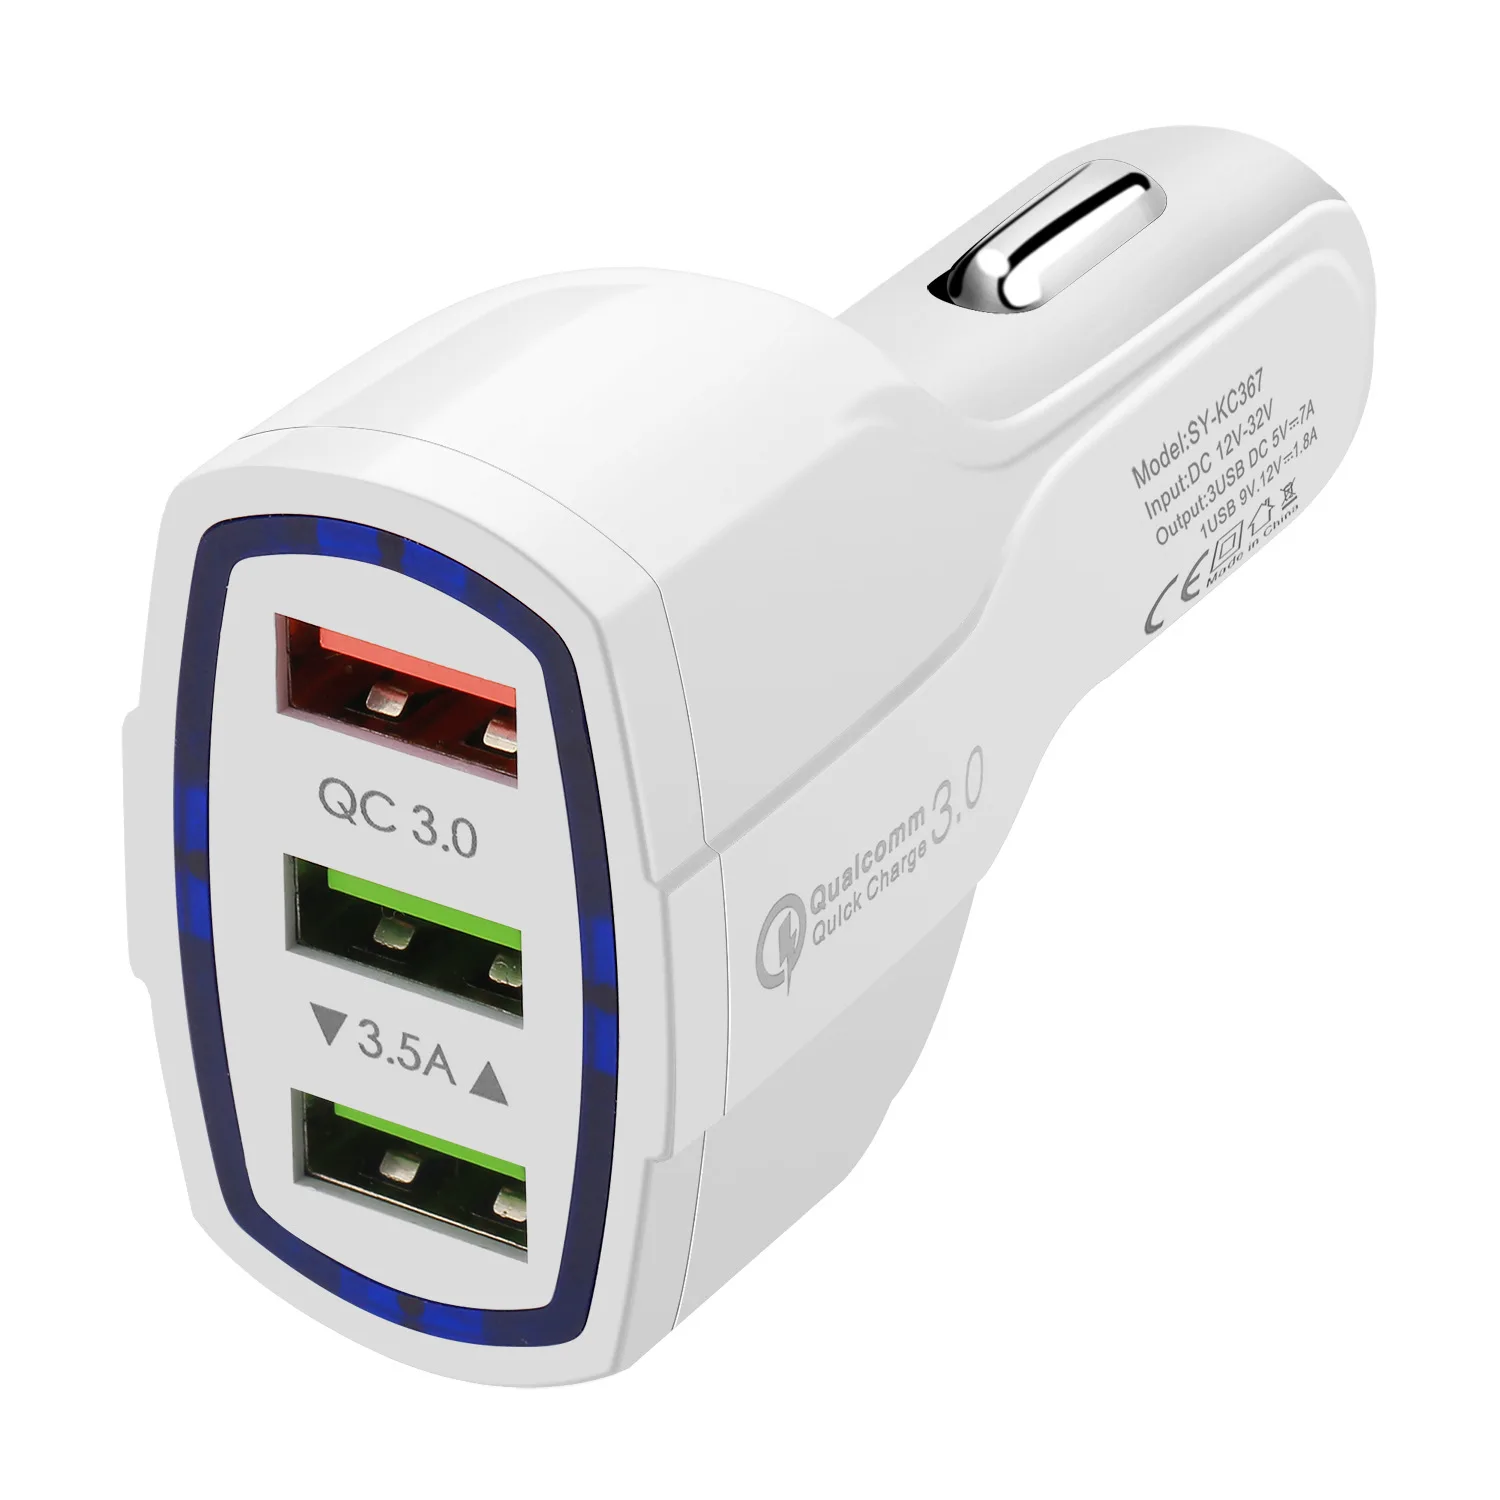 

QC car charger three port USB car charger one tow three 3.5A quick charge QC3.0 car phone charger white